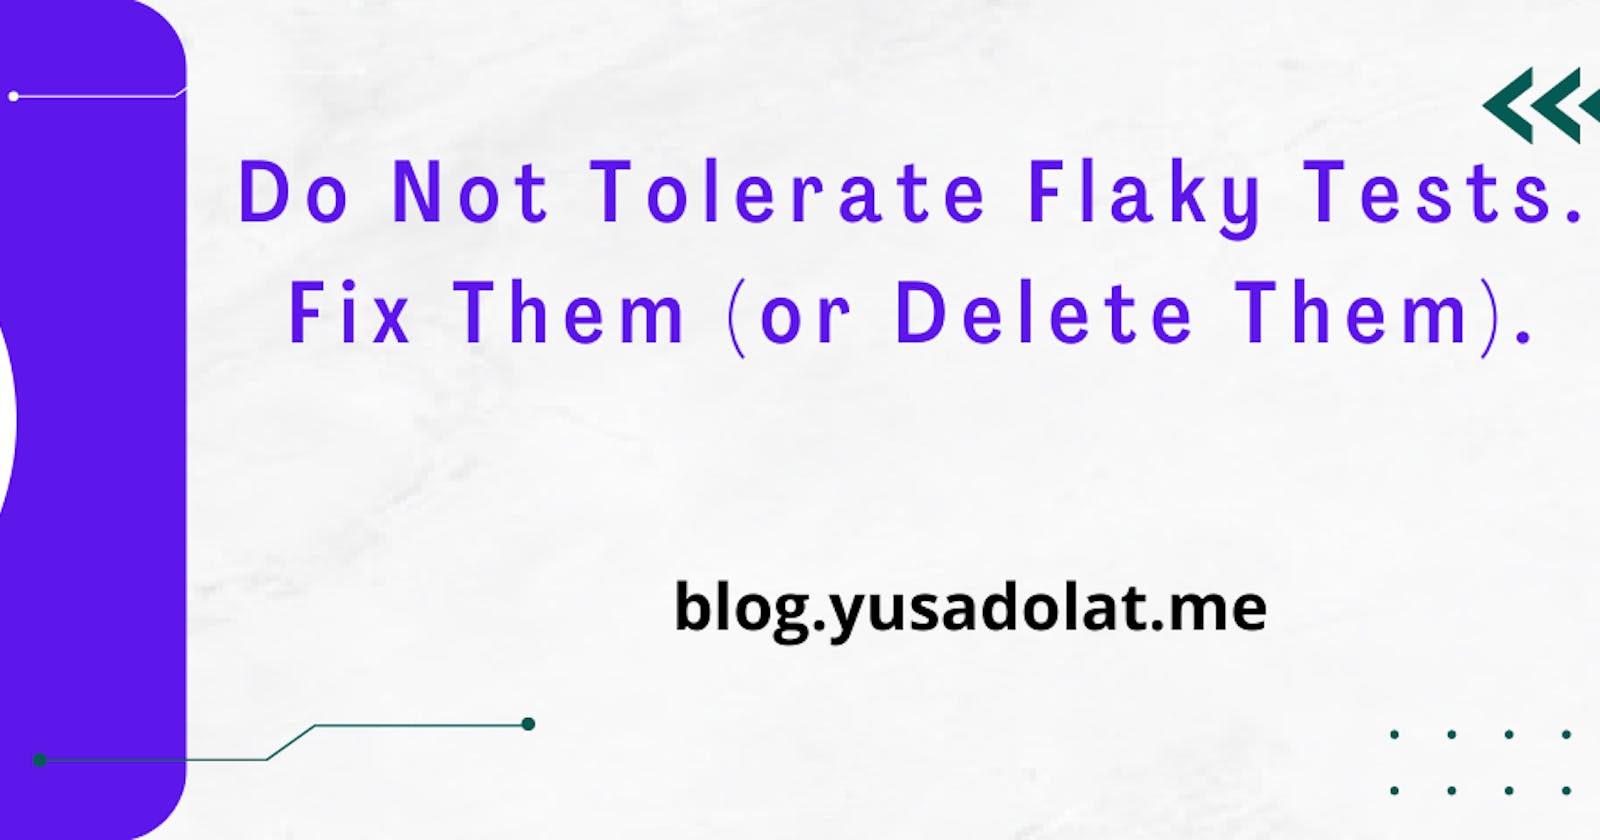 Do Not Tolerate Flaky Tests. Fix Them (or Delete Them).